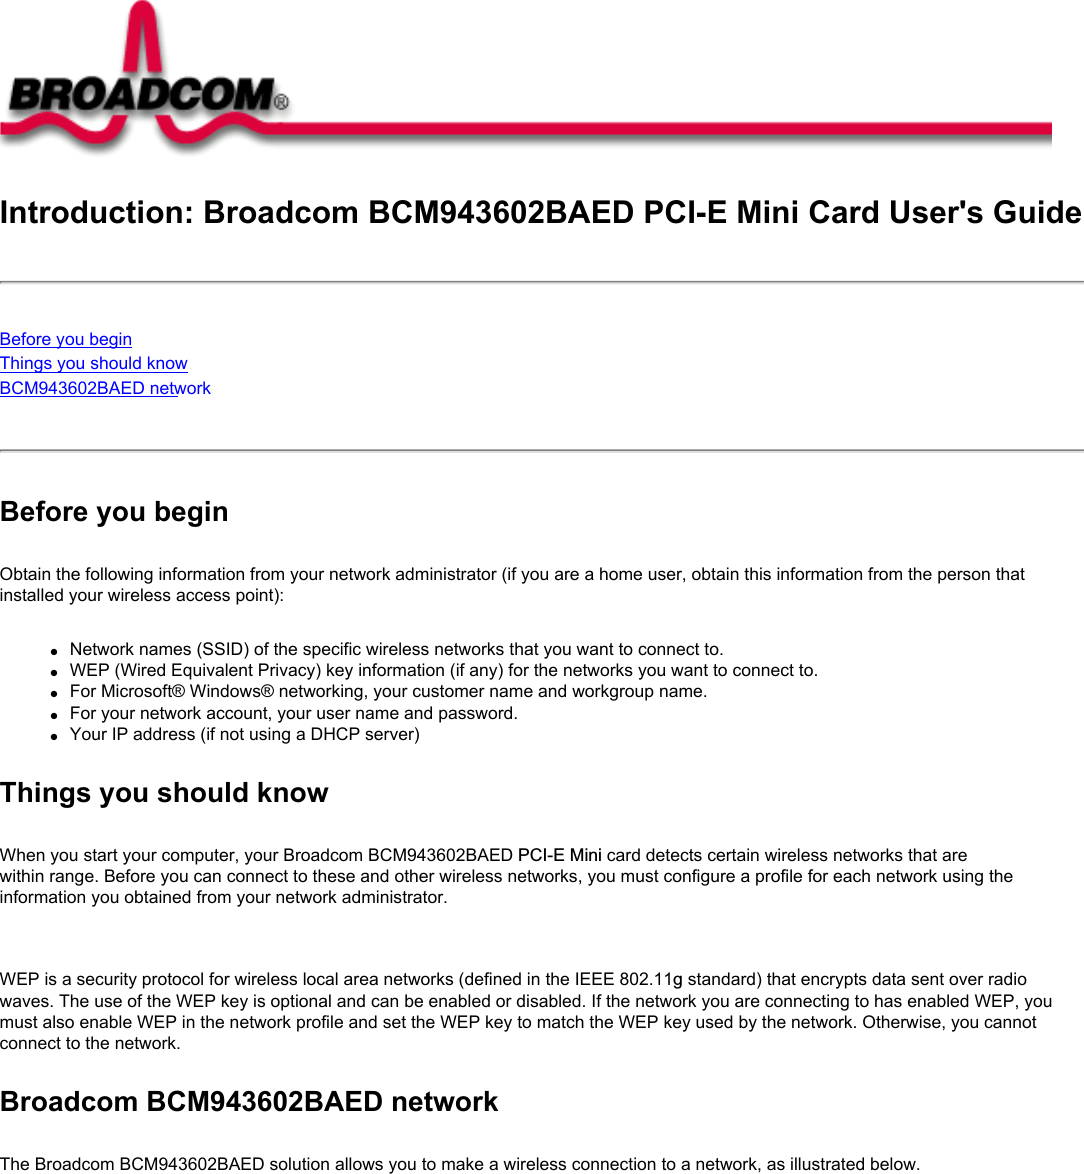 Introduction: Broadcom BCM943602BAED PCI-E Mini Card User&apos;s GuideBefore you beginThings you should knowBCM943602BAED network Before you beginObtain the following information from your network administrator (if you are a home user, obtain this information from the person that installed your wireless access point):●     Network names (SSID) of the specific wireless networks that you want to connect to.●     WEP (Wired Equivalent Privacy) key information (if any) for the networks you want to connect to.●     For Microsoft® Windows® networking, your customer name and workgroup name.●     For your network account, your user name and password.●     Your IP address (if not using a DHCP server)Things you should knowWhen you start your computer, your Broadcom BCM943602BAED PCI-E Mini card detects certain wireless networks that are within range. Before you can connect to these and other wireless networks, you must configure a profile for each network using the information you obtained from your network administrator.   WEP is a security protocol for wireless local area networks (defined in the IEEE 802.11g standard) that encrypts data sent over radio waves. The use of the WEP key is optional and can be enabled or disabled. If the network you are connecting to has enabled WEP, you must also enable WEP in the network profile and set the WEP key to match the WEP key used by the network. Otherwise, you cannot connect to the network.Broadcom BCM943602BAED networkThe Broadcom BCM943602BAED solution allows you to make a wireless connection to a network, as illustrated below.